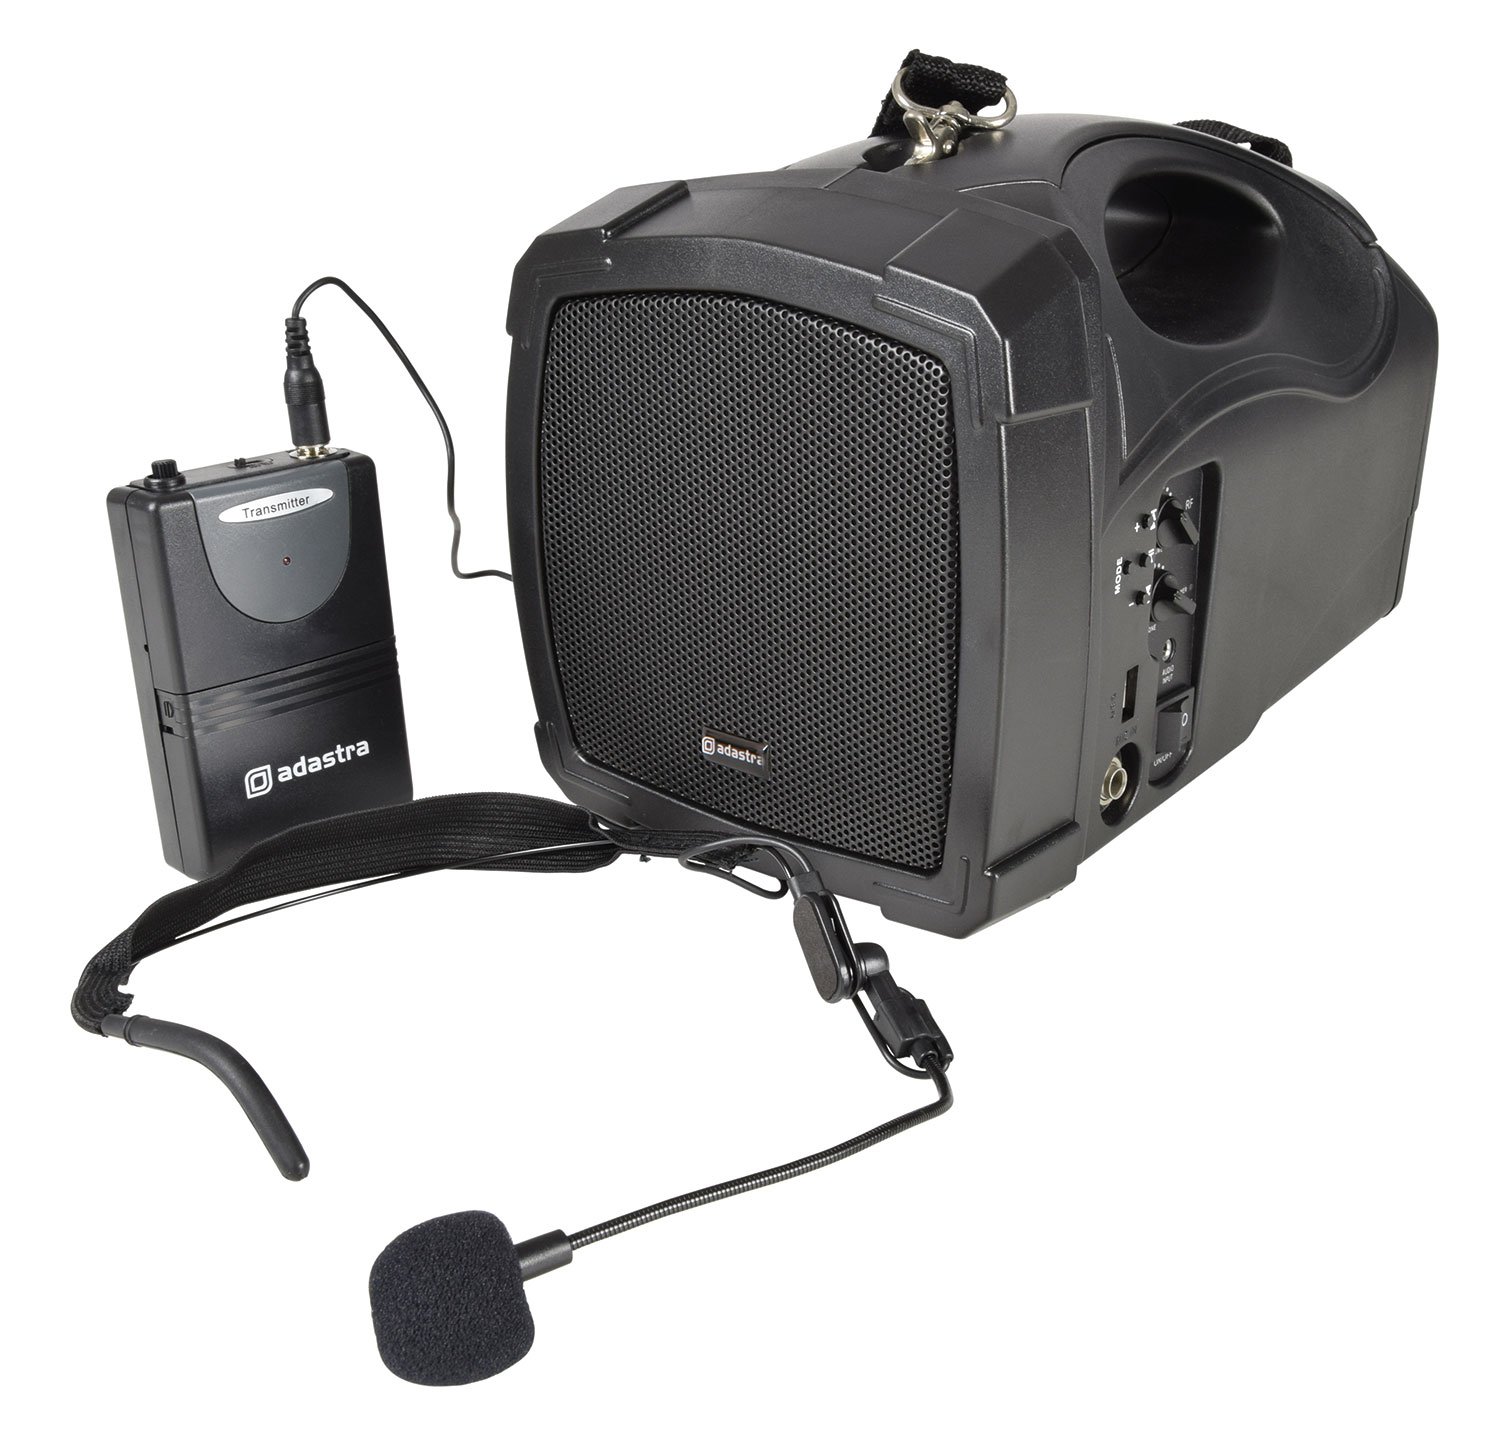 Handheld PA System with Neckband Mic and Bluetooth H25B Handheld PA with Neckband Mic, USB, FM & Bluetooth